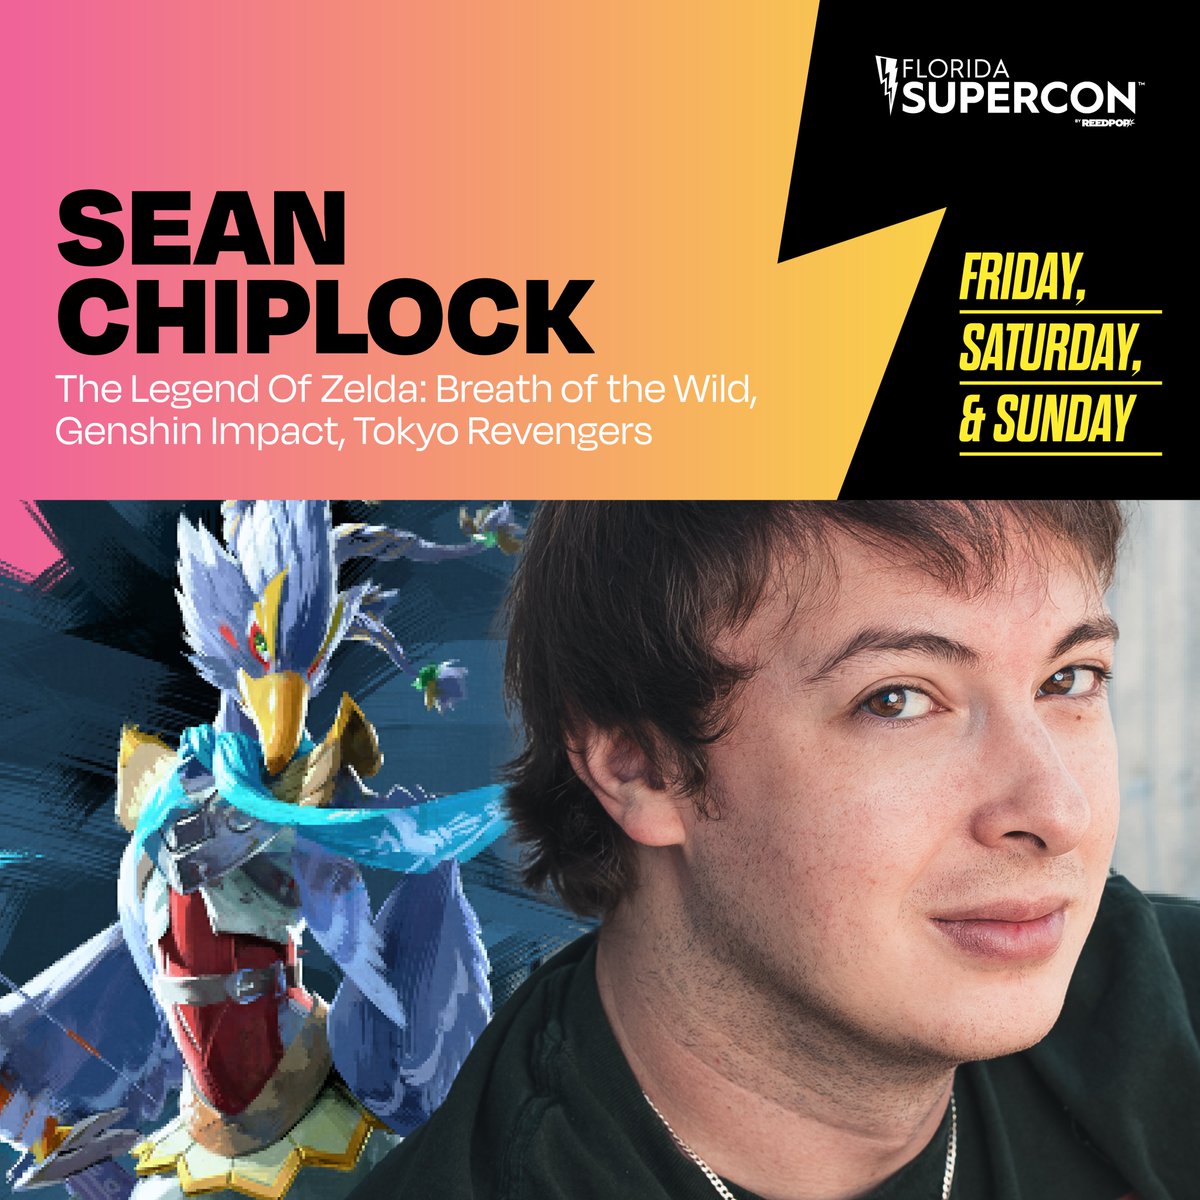 Get your rupees and master sword ready ⚔️ Patricia Summerset (Zelda) and Sean Chiplock (Revali, Teba, and the Great Deku Tree) from The Legend of Zelda: Breath of the Wild join us at Florida Supercon in Miami Beach July 12-14! Buy tickets now: Supercon24.com/BuyTickets